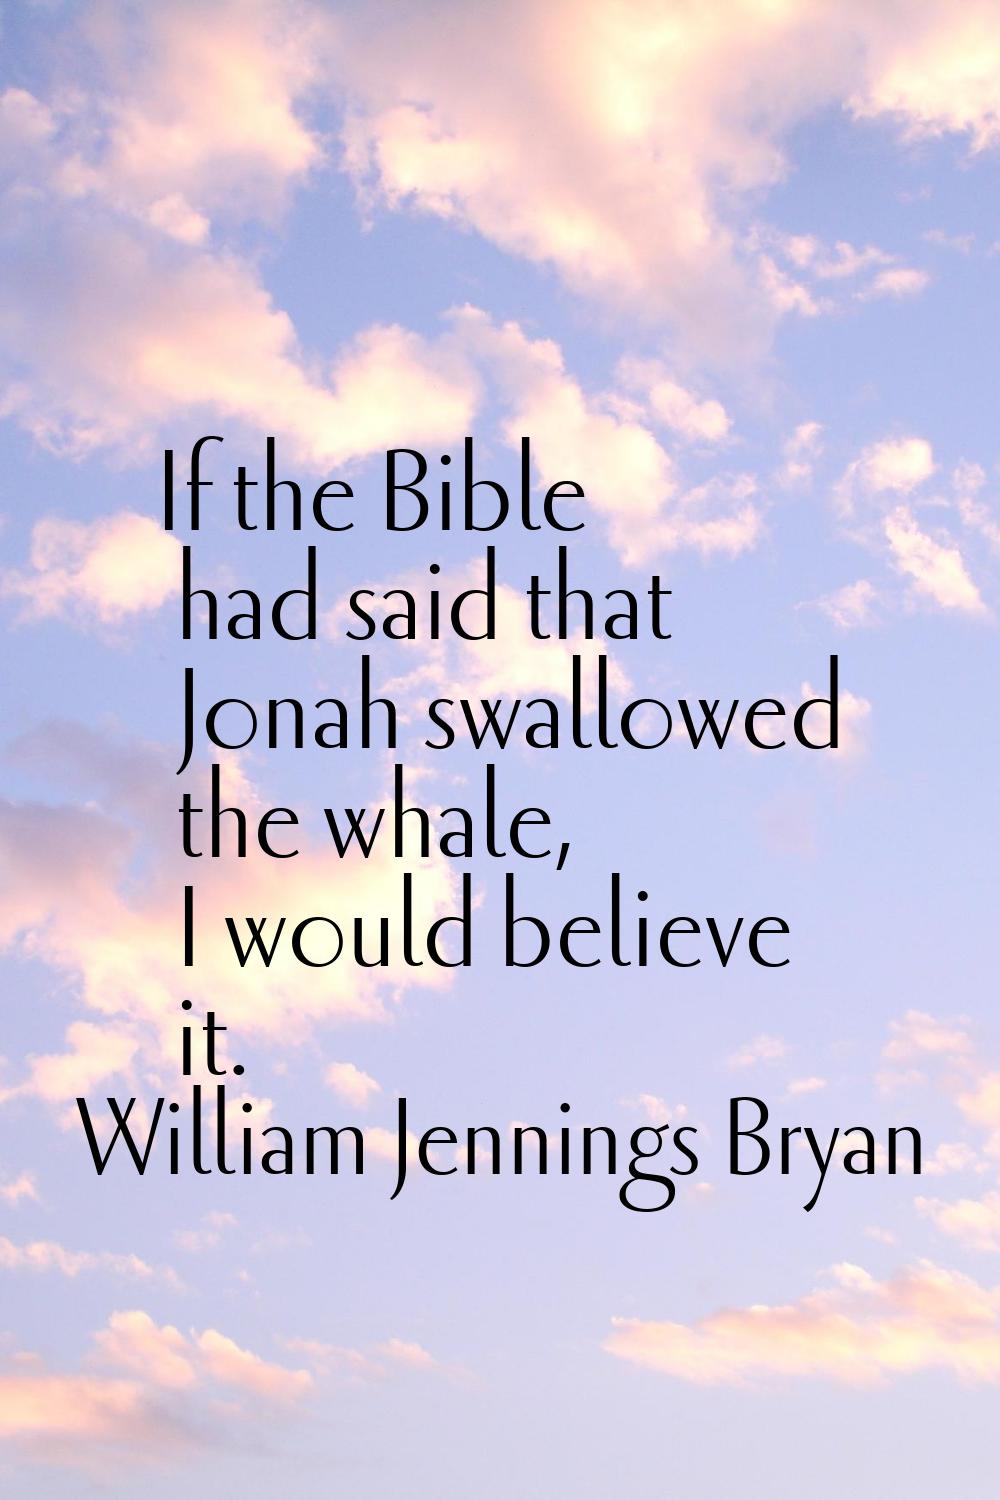 If the Bible had said that Jonah swallowed the whale, I would believe it.